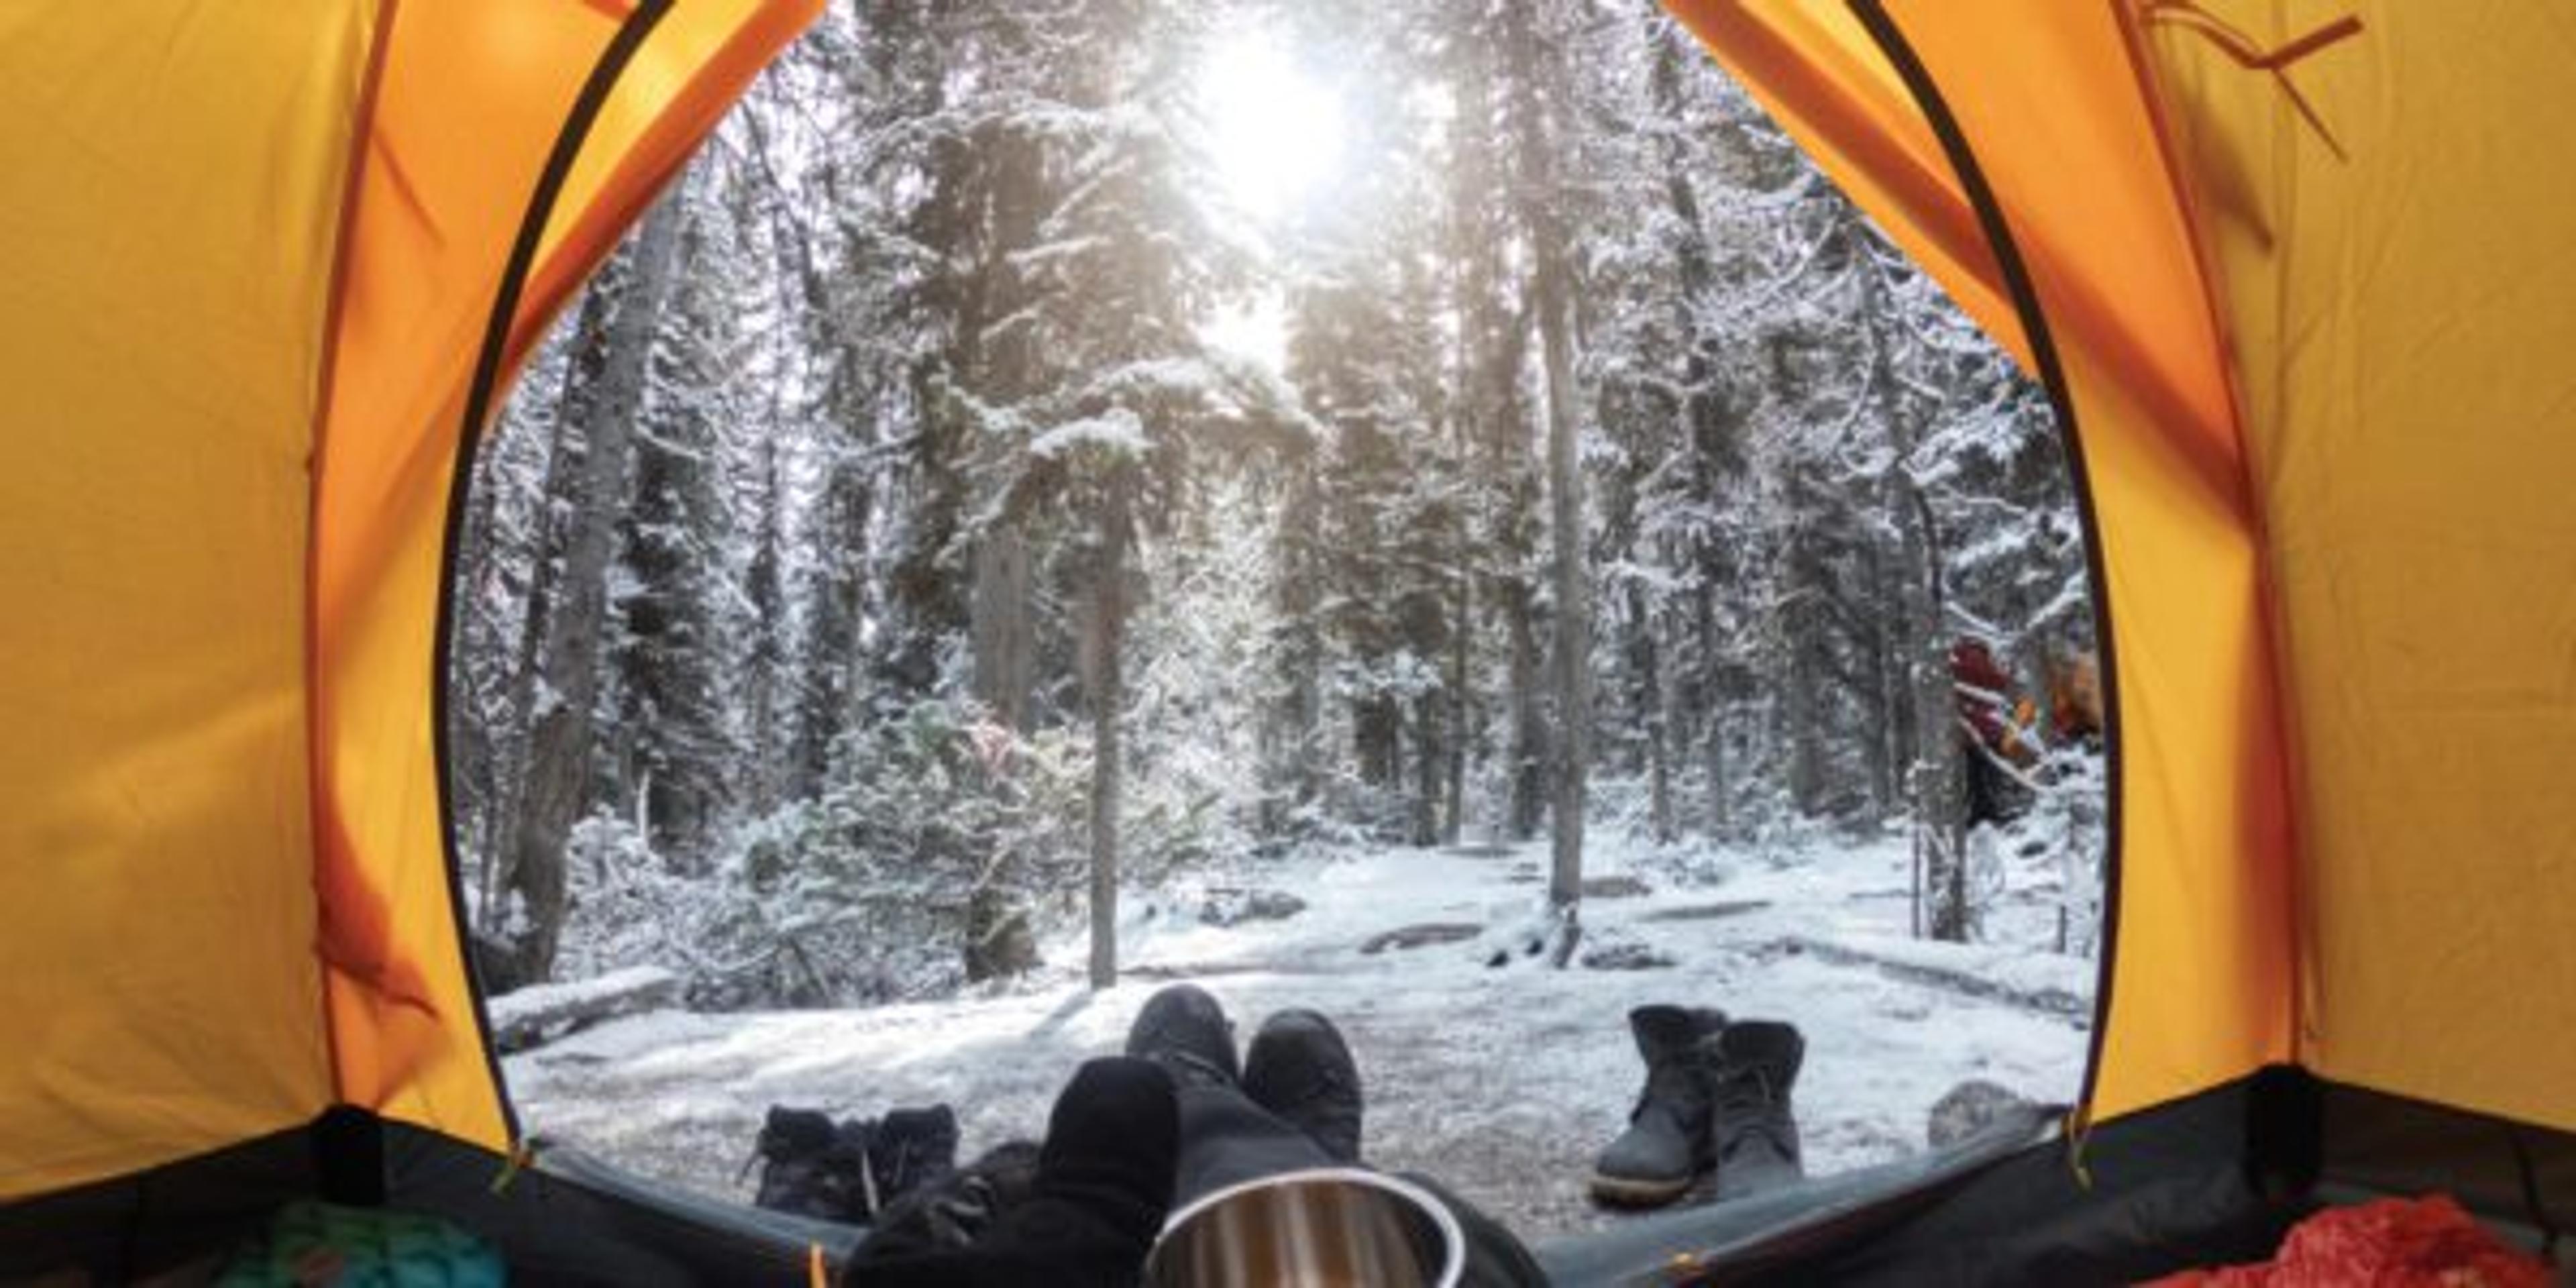 A person's first-person-view of the wintertime wilderness from the inside of a tent.